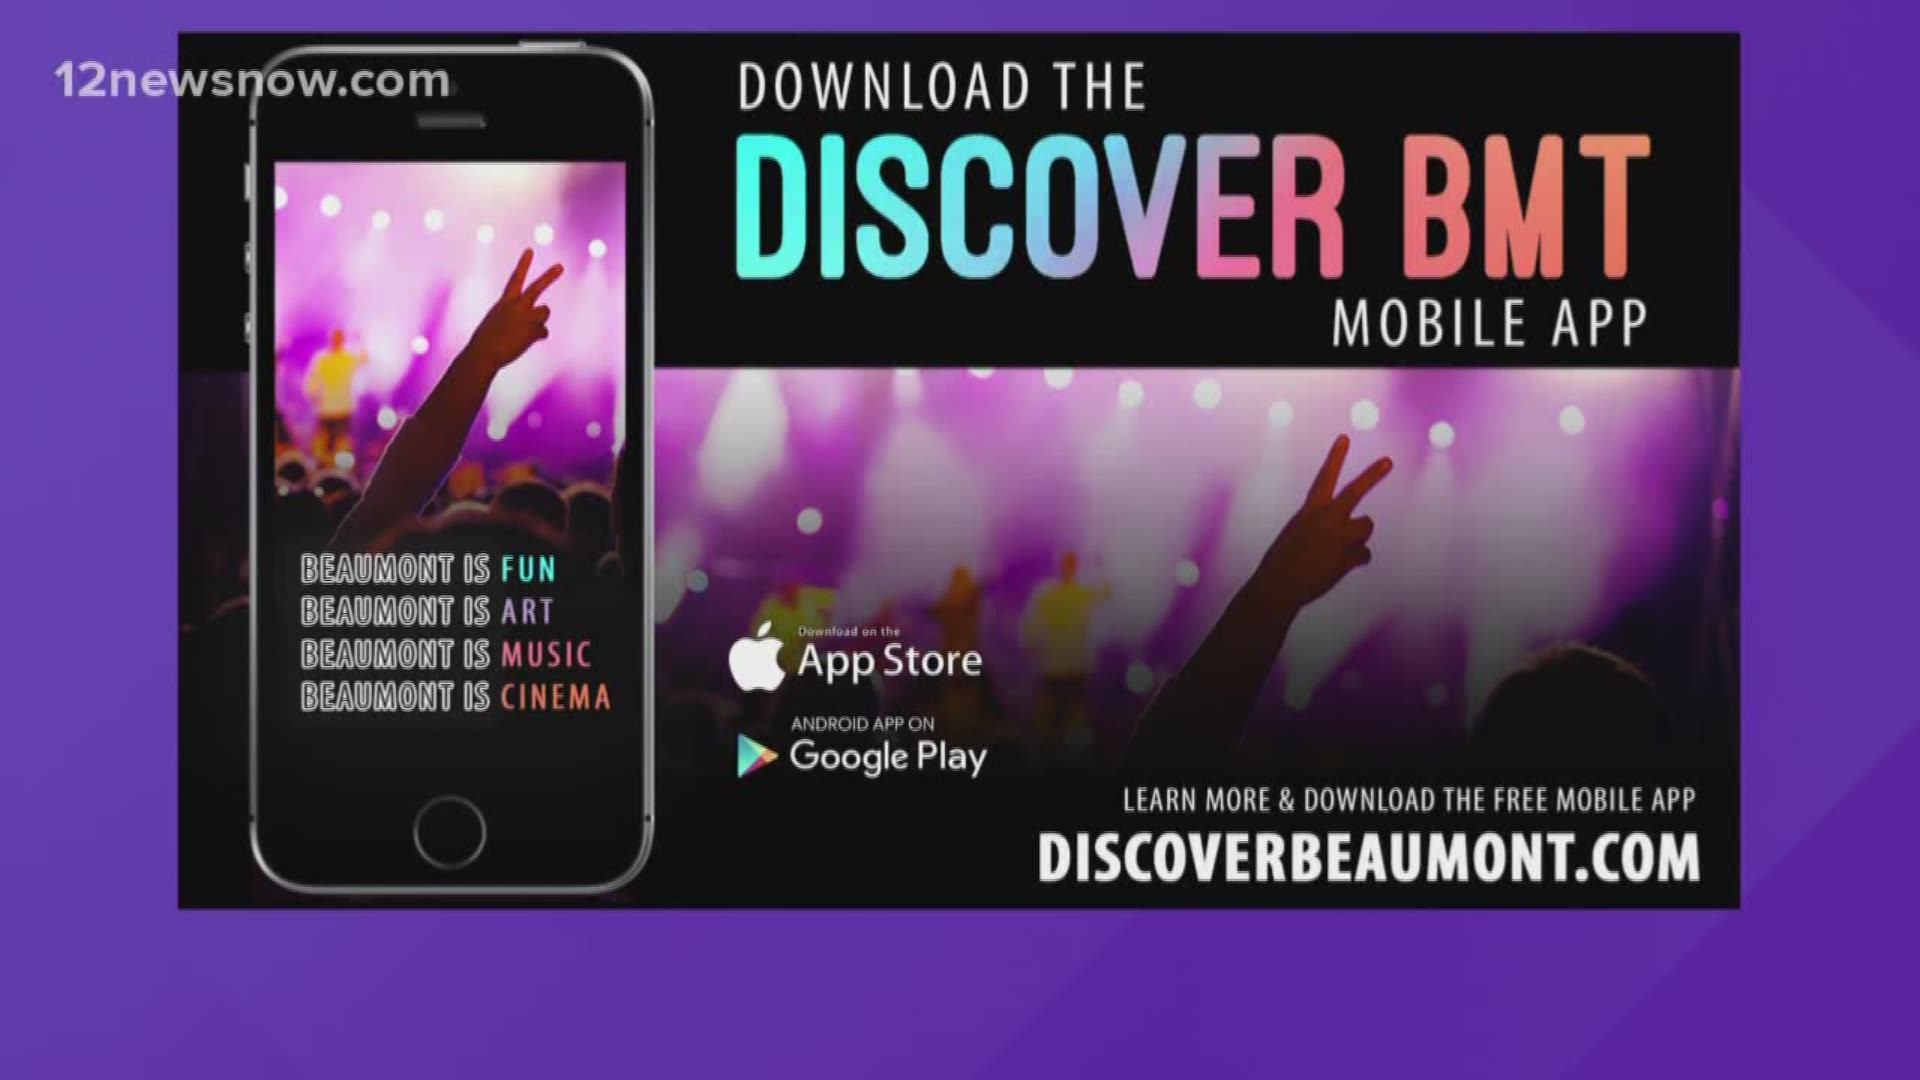 Be sure to download the Discover BMT app or visit discoverbeaumont.com for more even information.